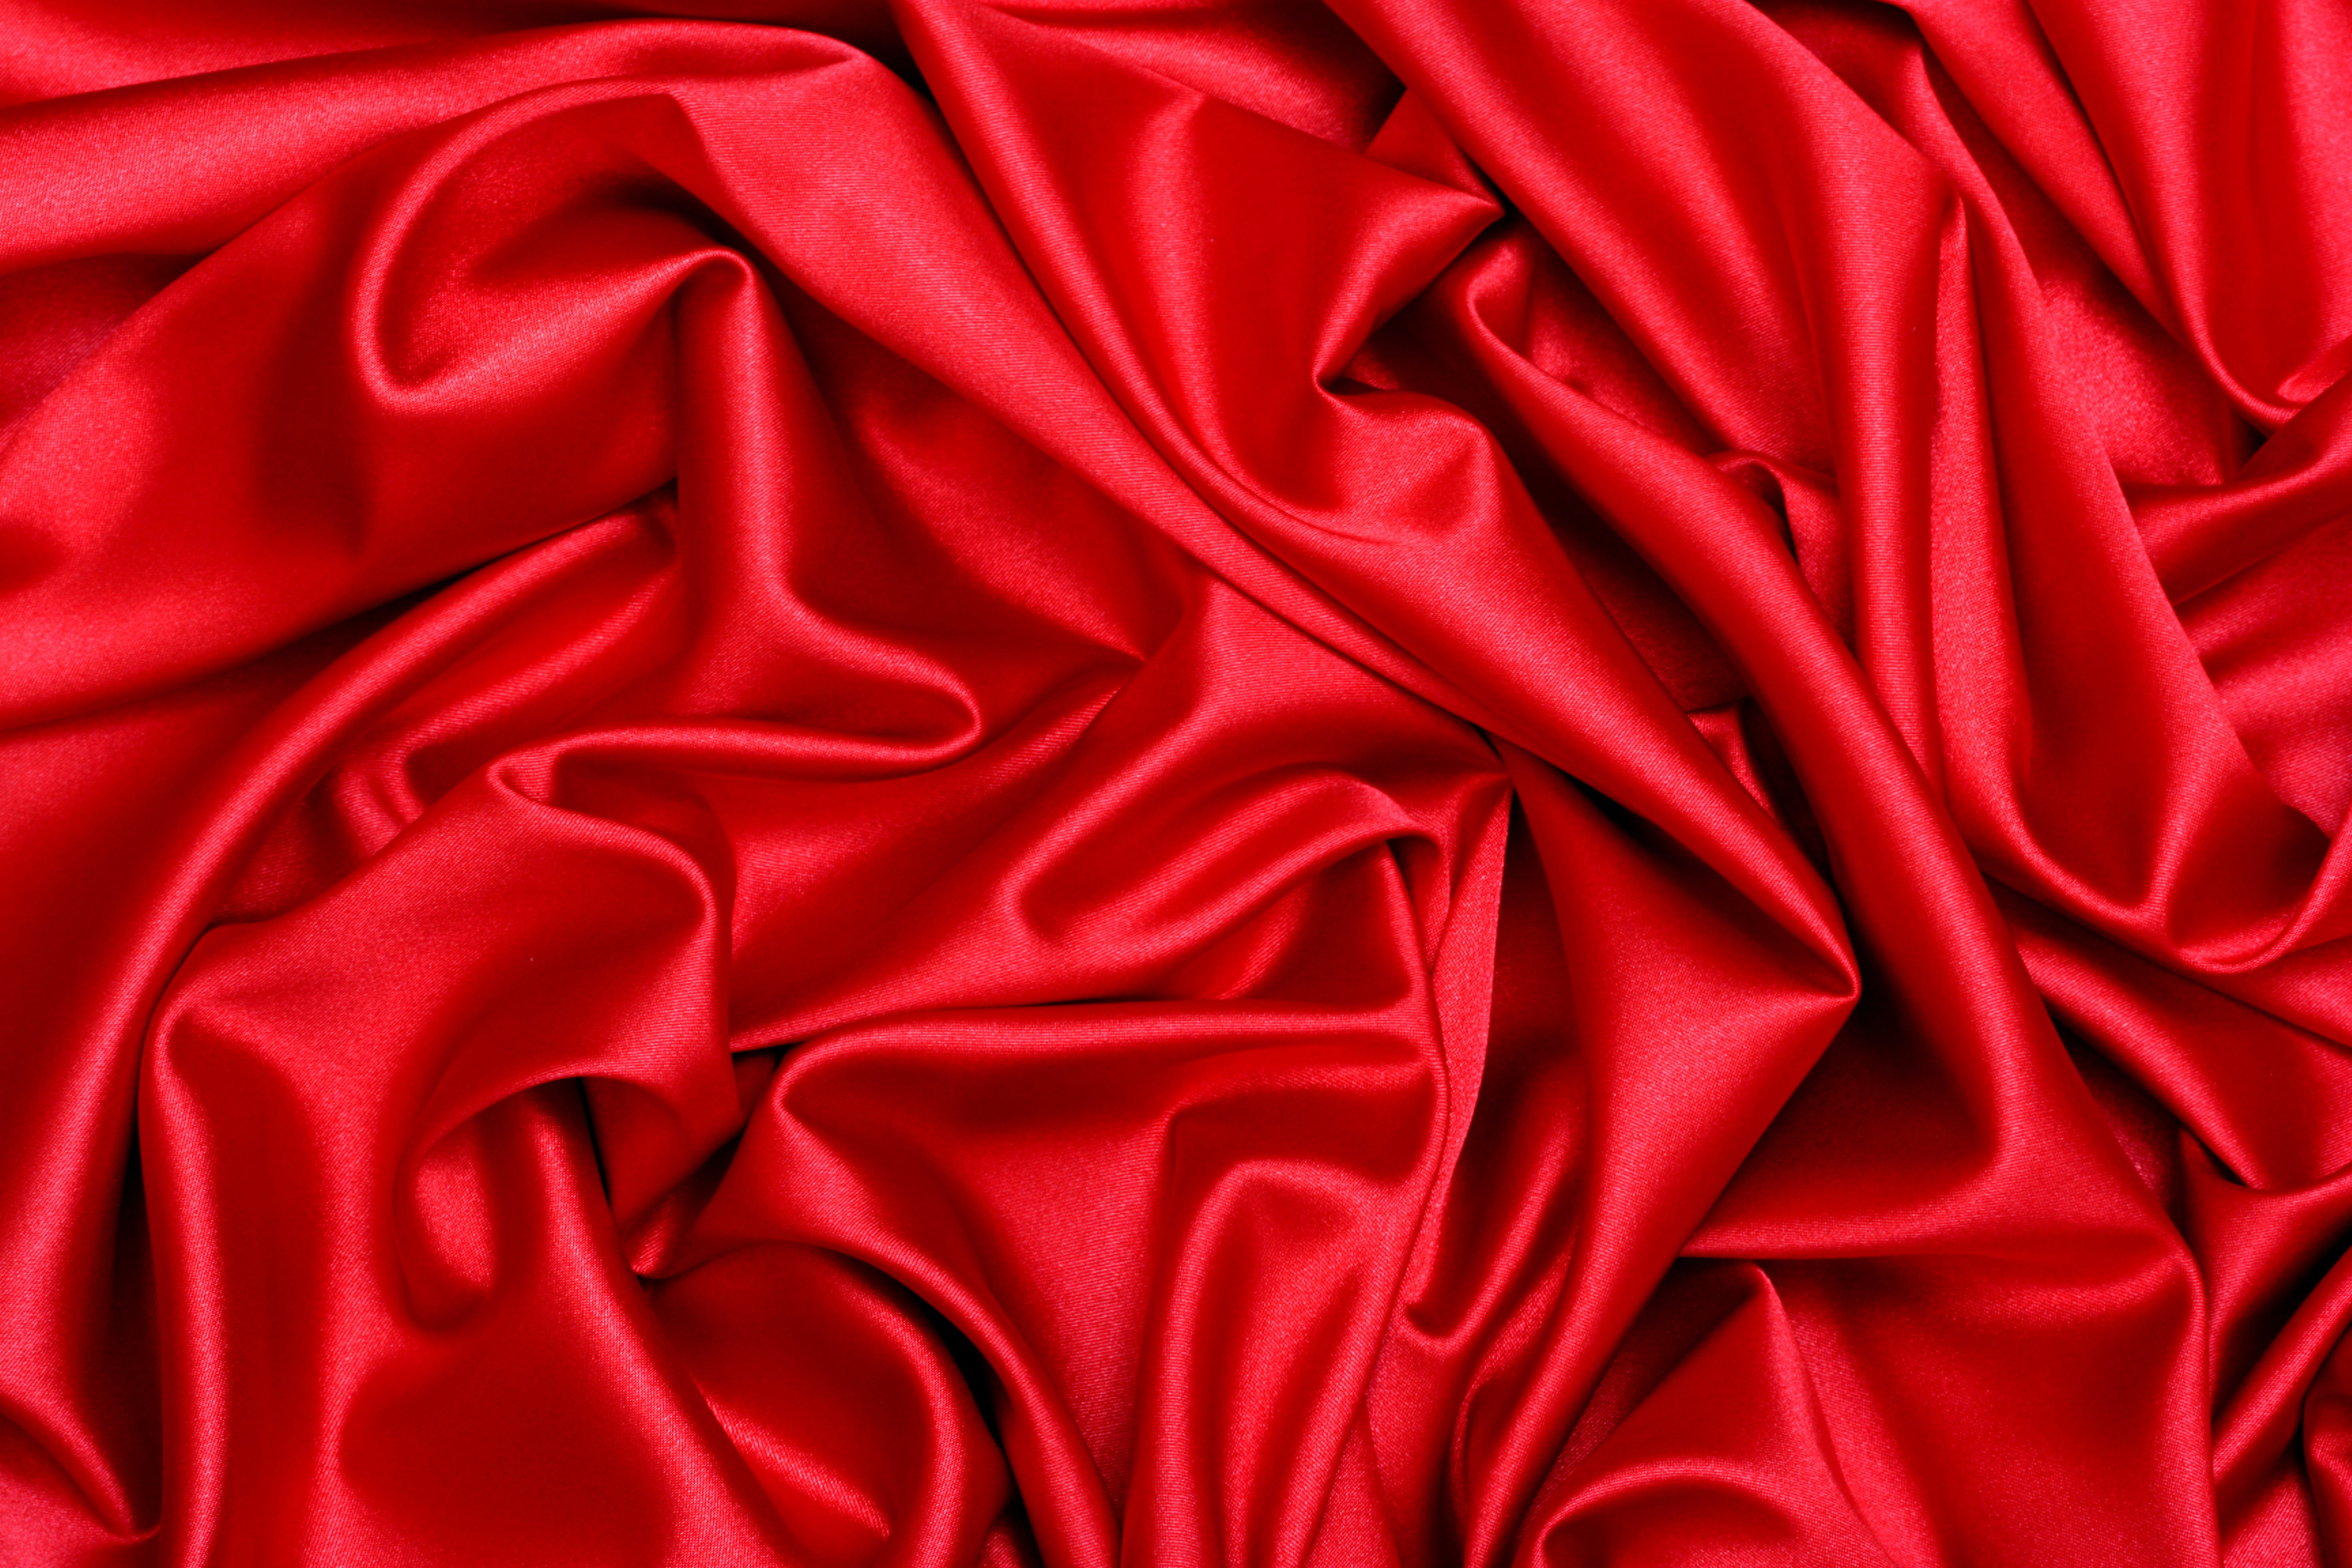 red textile, fabric, folds, satin, backgrounds, silk, luxury